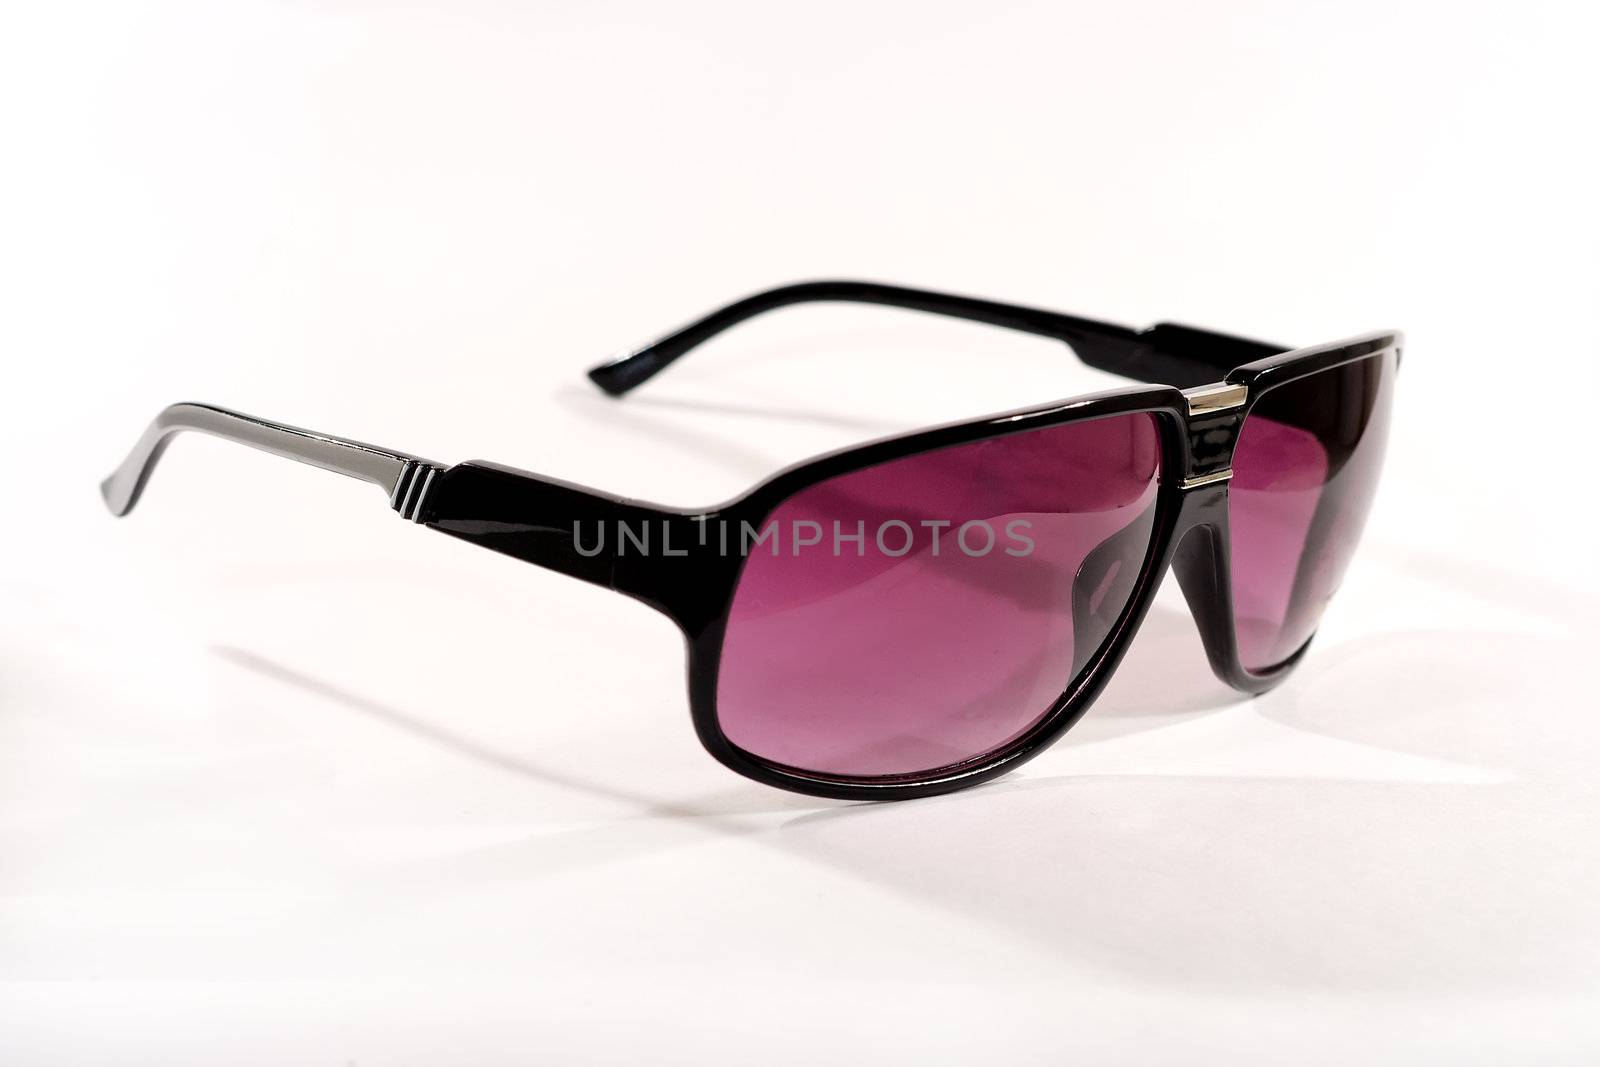 Pair of fashionable modern sunglasses with graduated polarised lenses on a white background